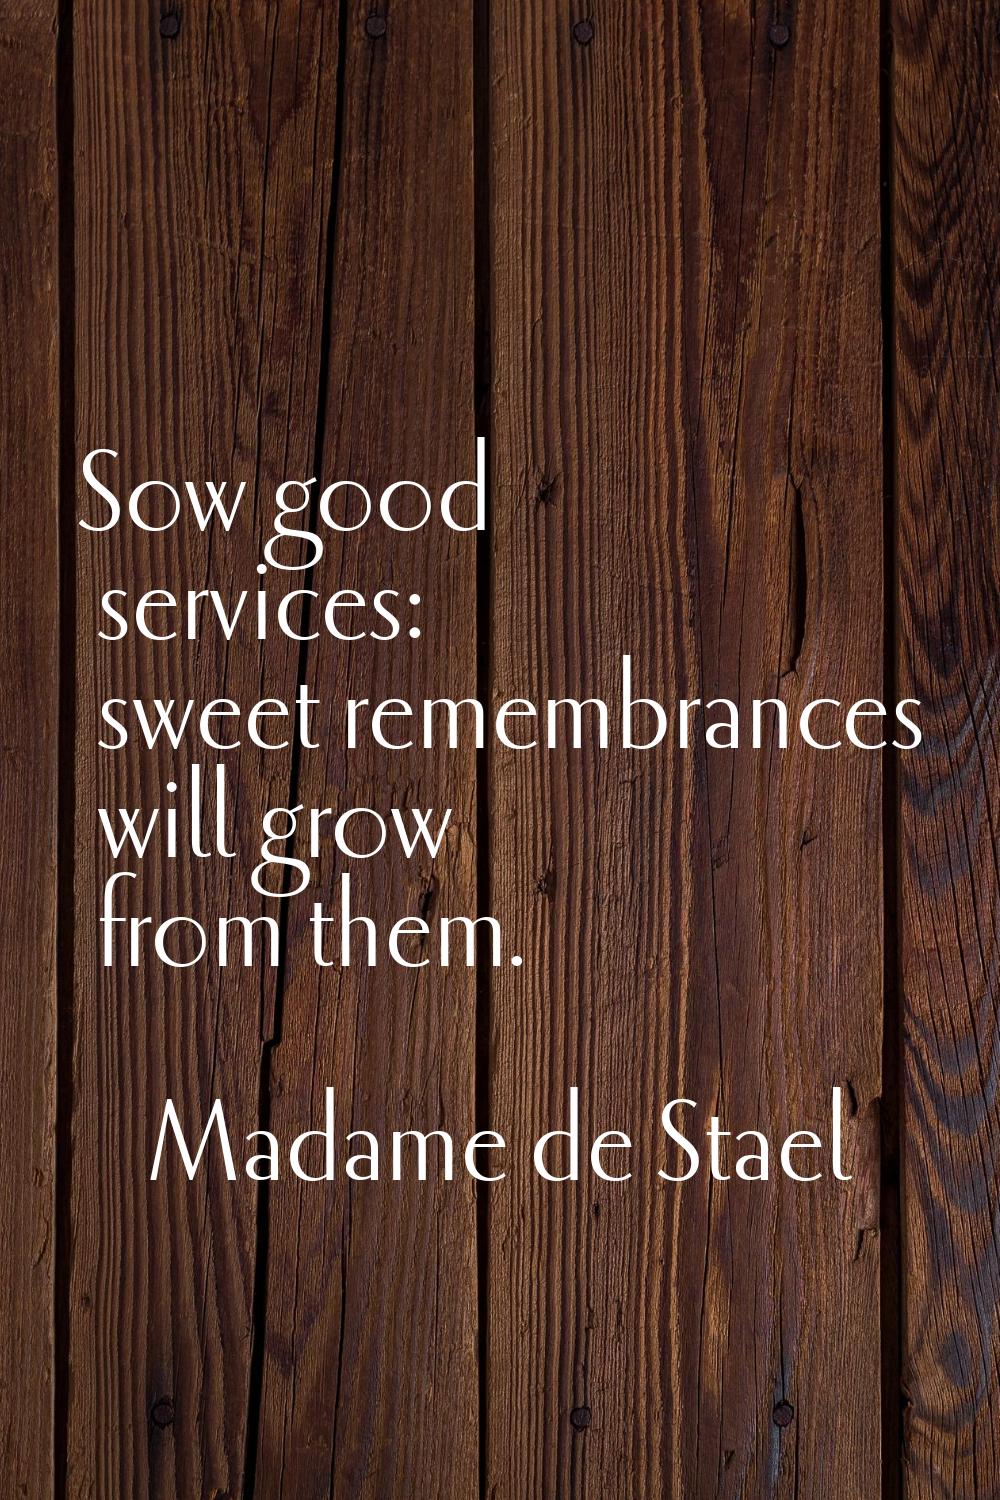 Sow good services: sweet remembrances will grow from them.